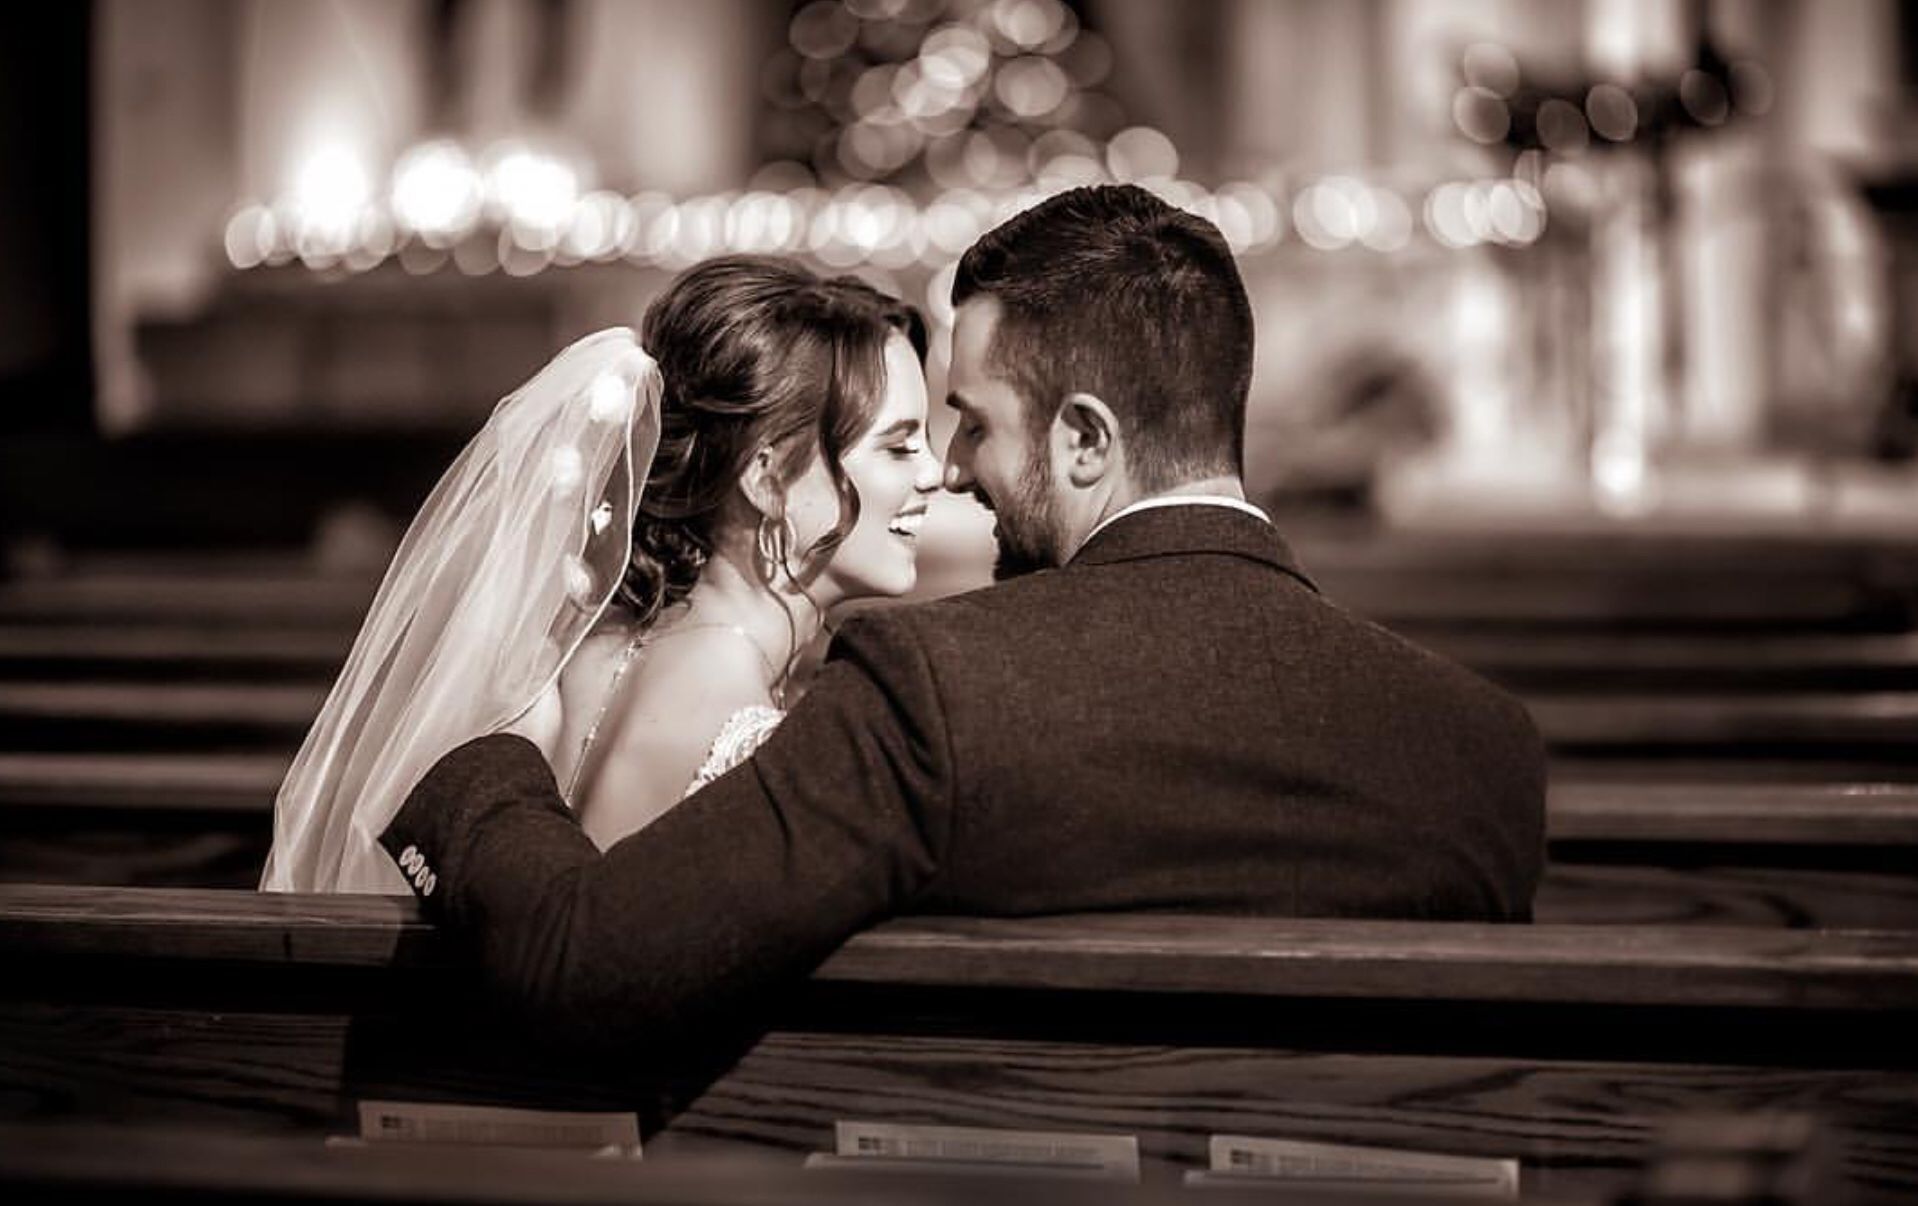 Wedding Photo in Church Pews -   14 wedding Pictures ceremony ideas